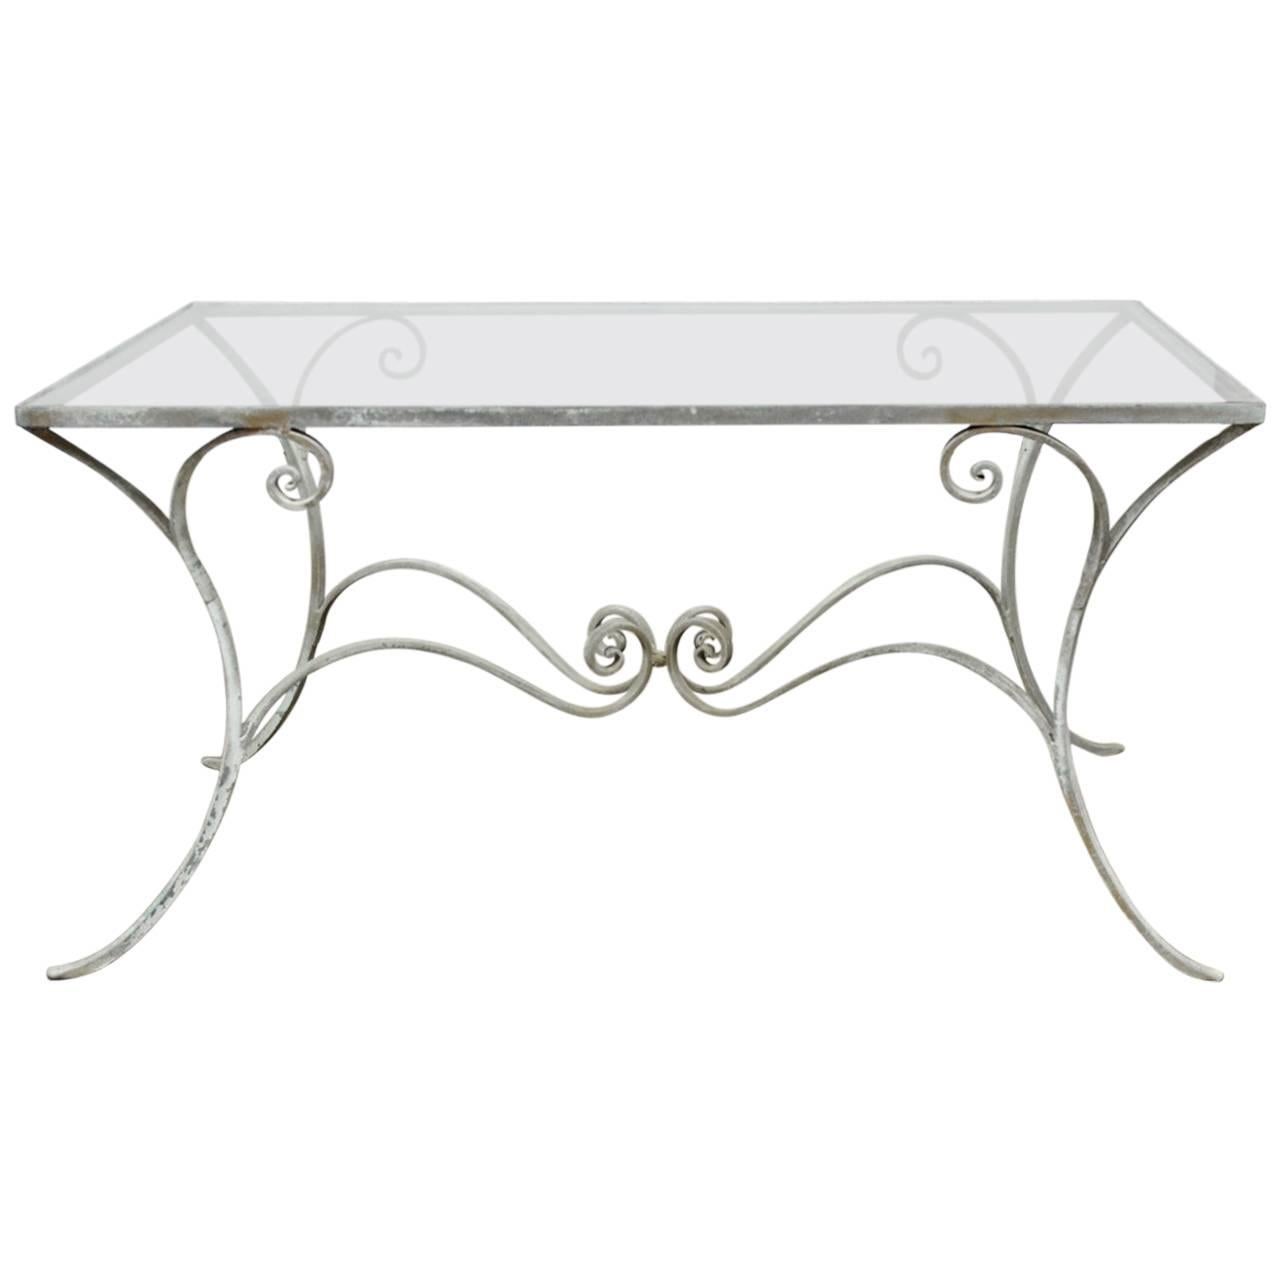 French Wrought Iron Garden Patio Dining Table